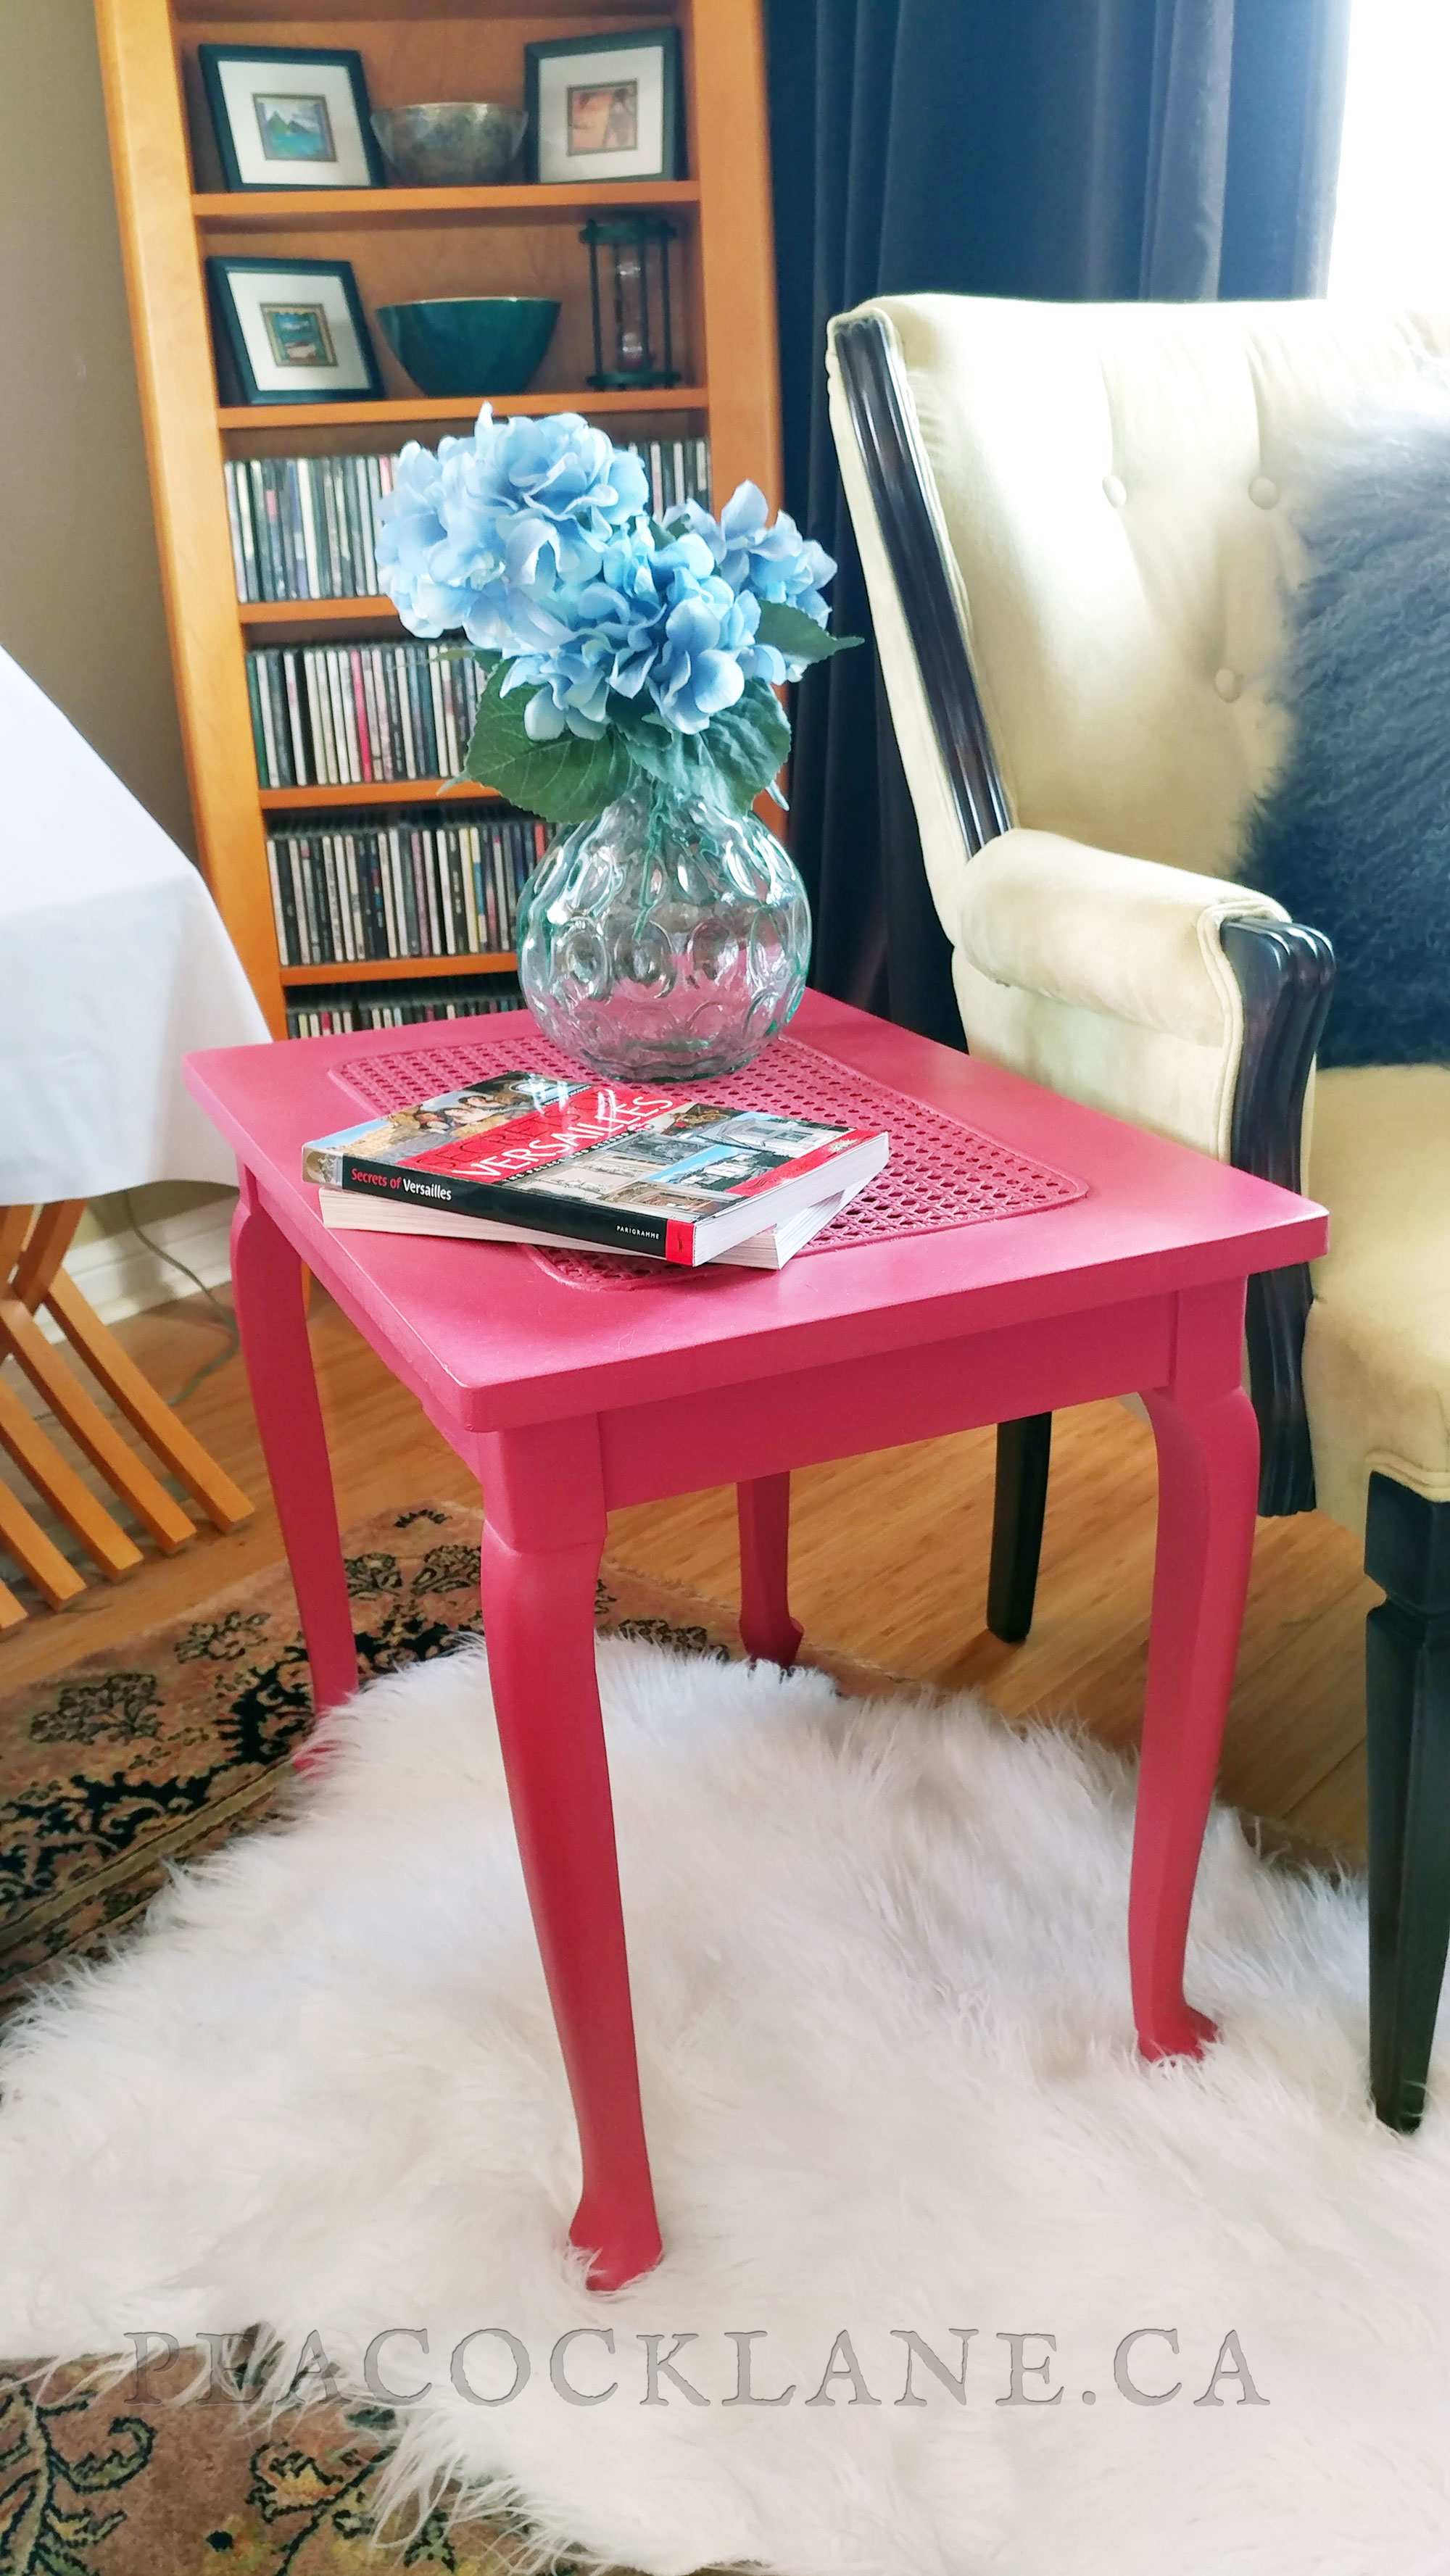 FOR SALE $95 - Pink Vintage Painted Side Table